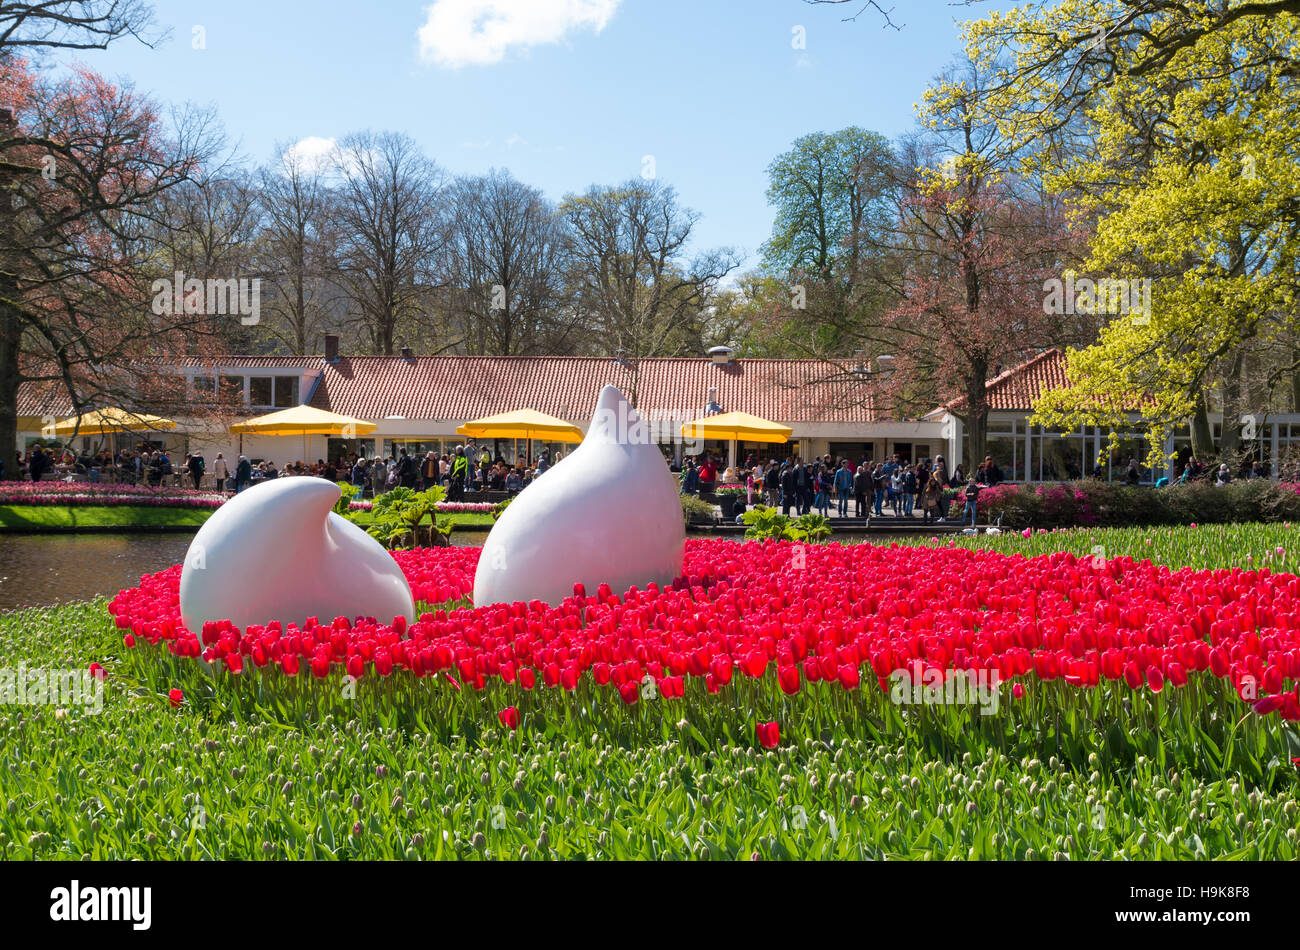 LISSE, NETHERLANDS - APRIL 17, 2016: Art objects in a field of blooming red tulips in the famous Keukenhof Gardens in the netherlands Stock Photo